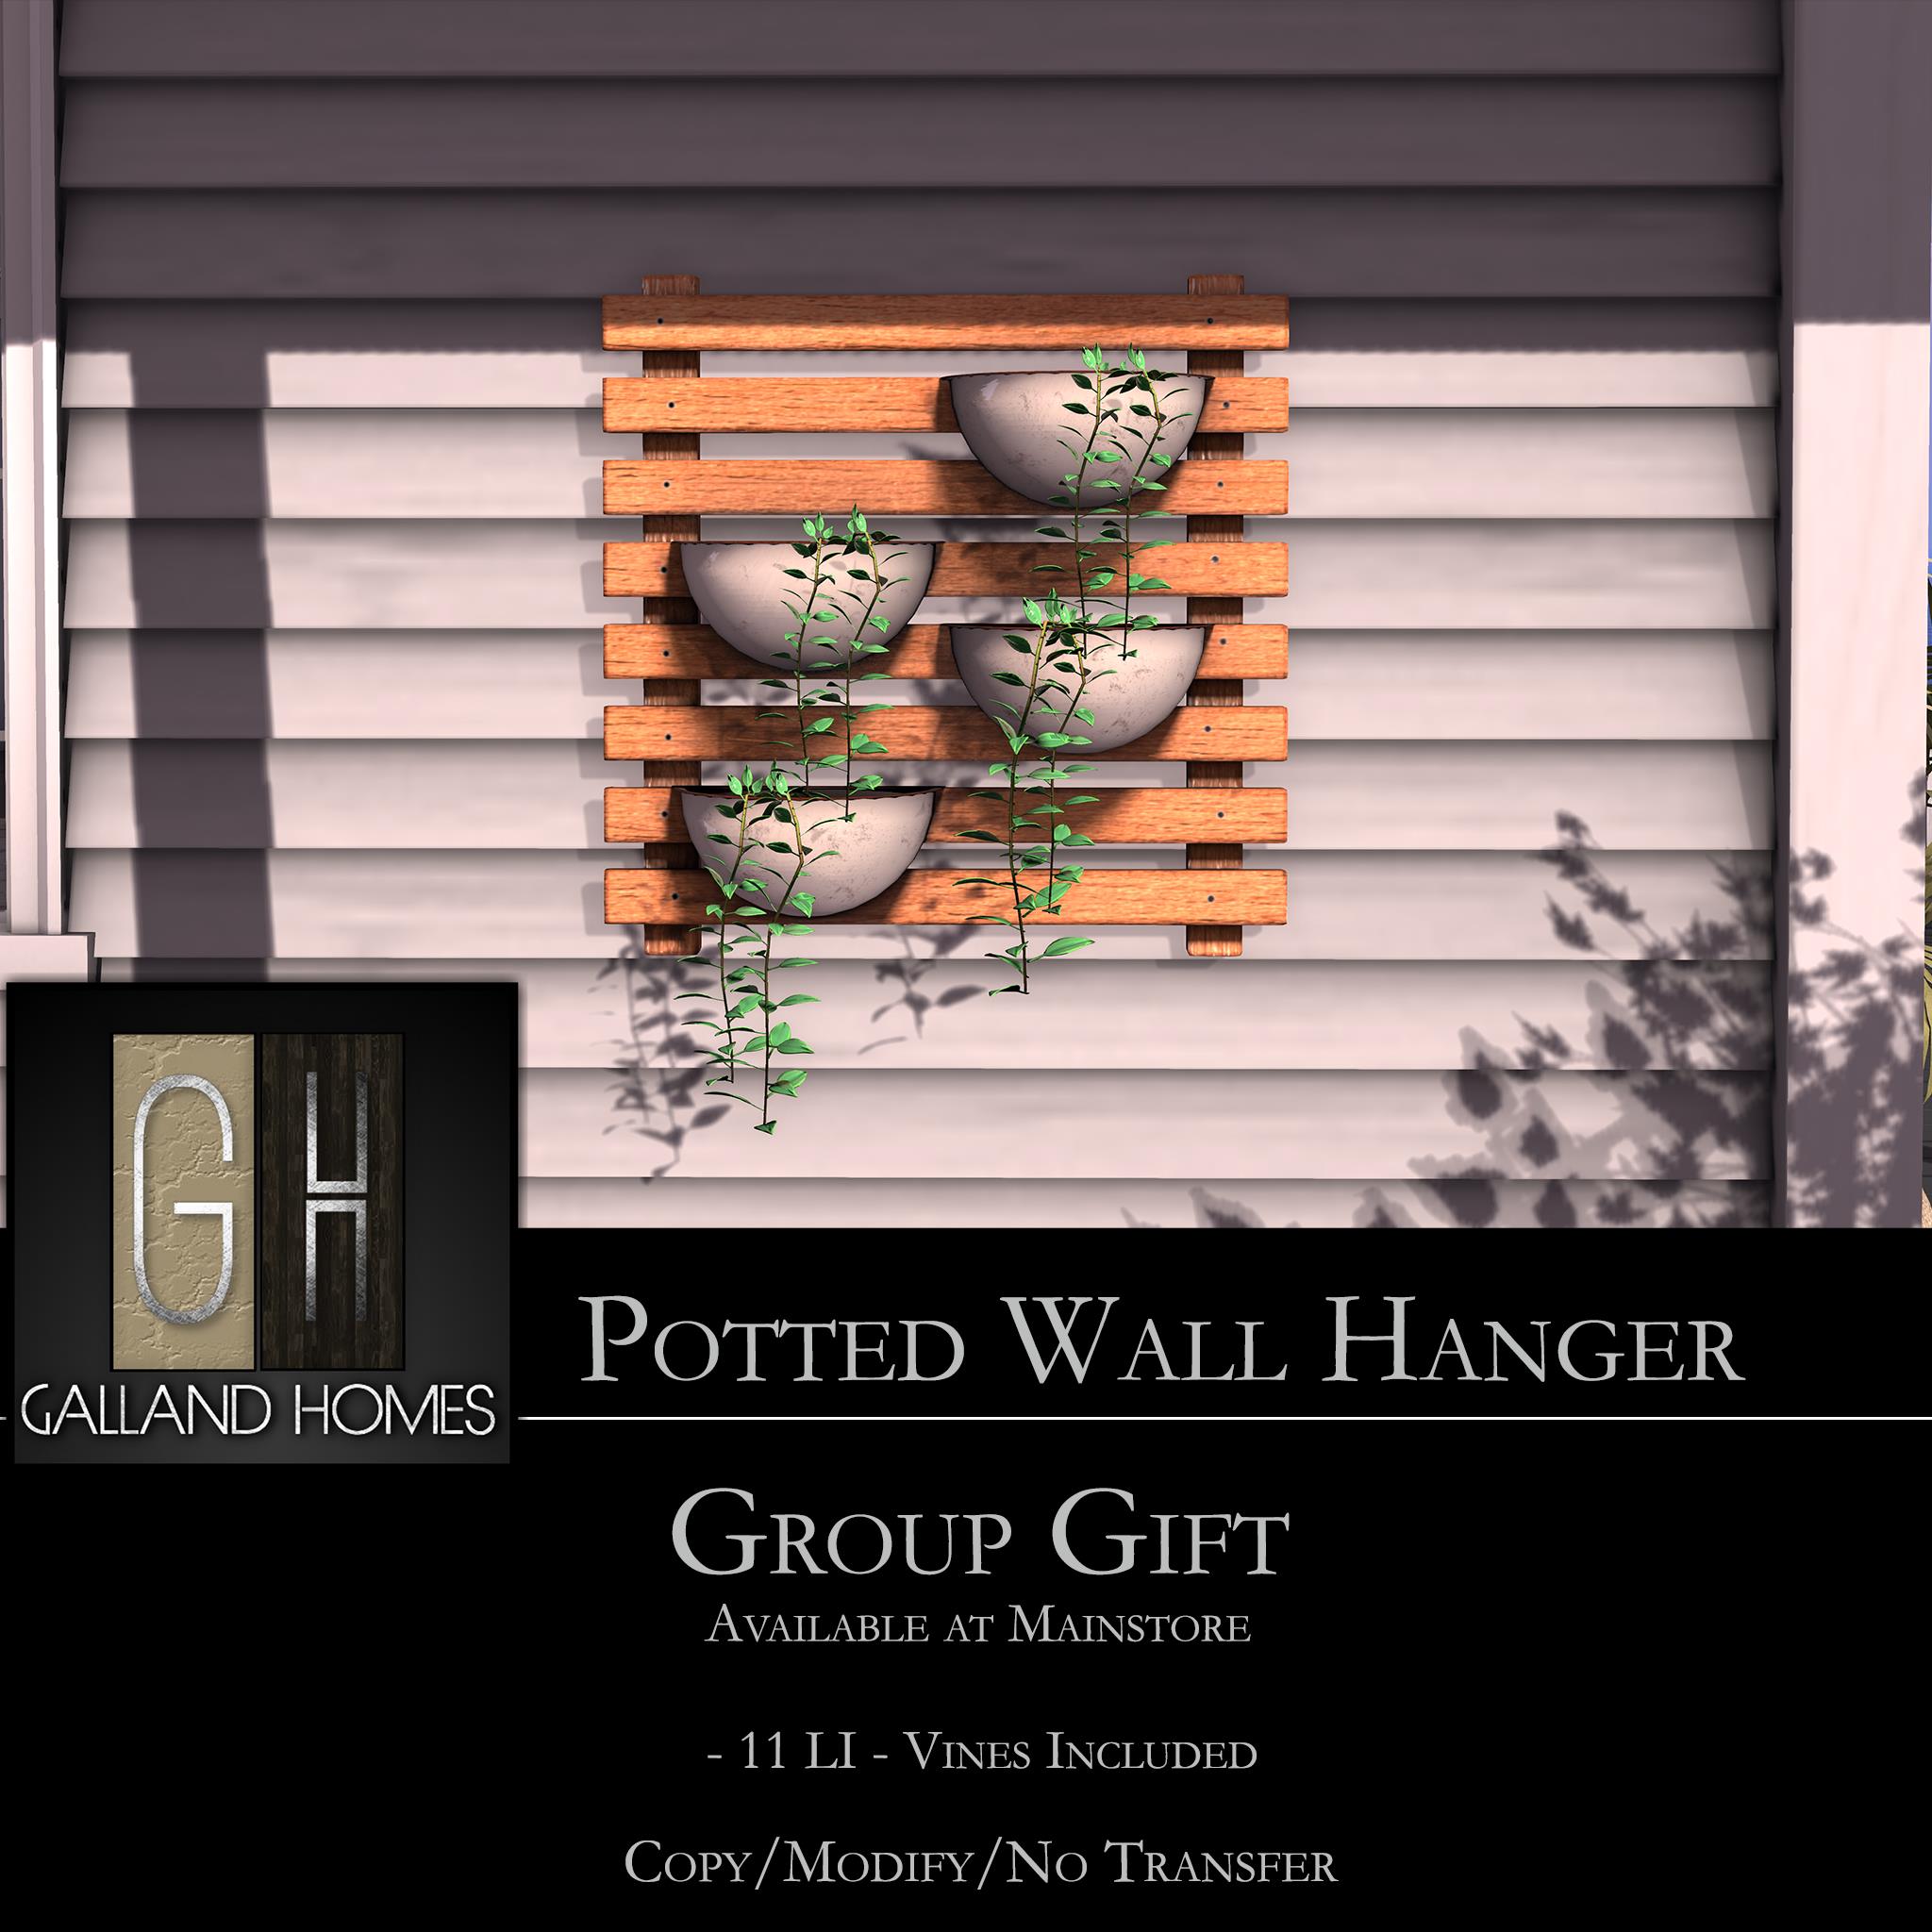 Galland Homes – Potted Wall Hanger